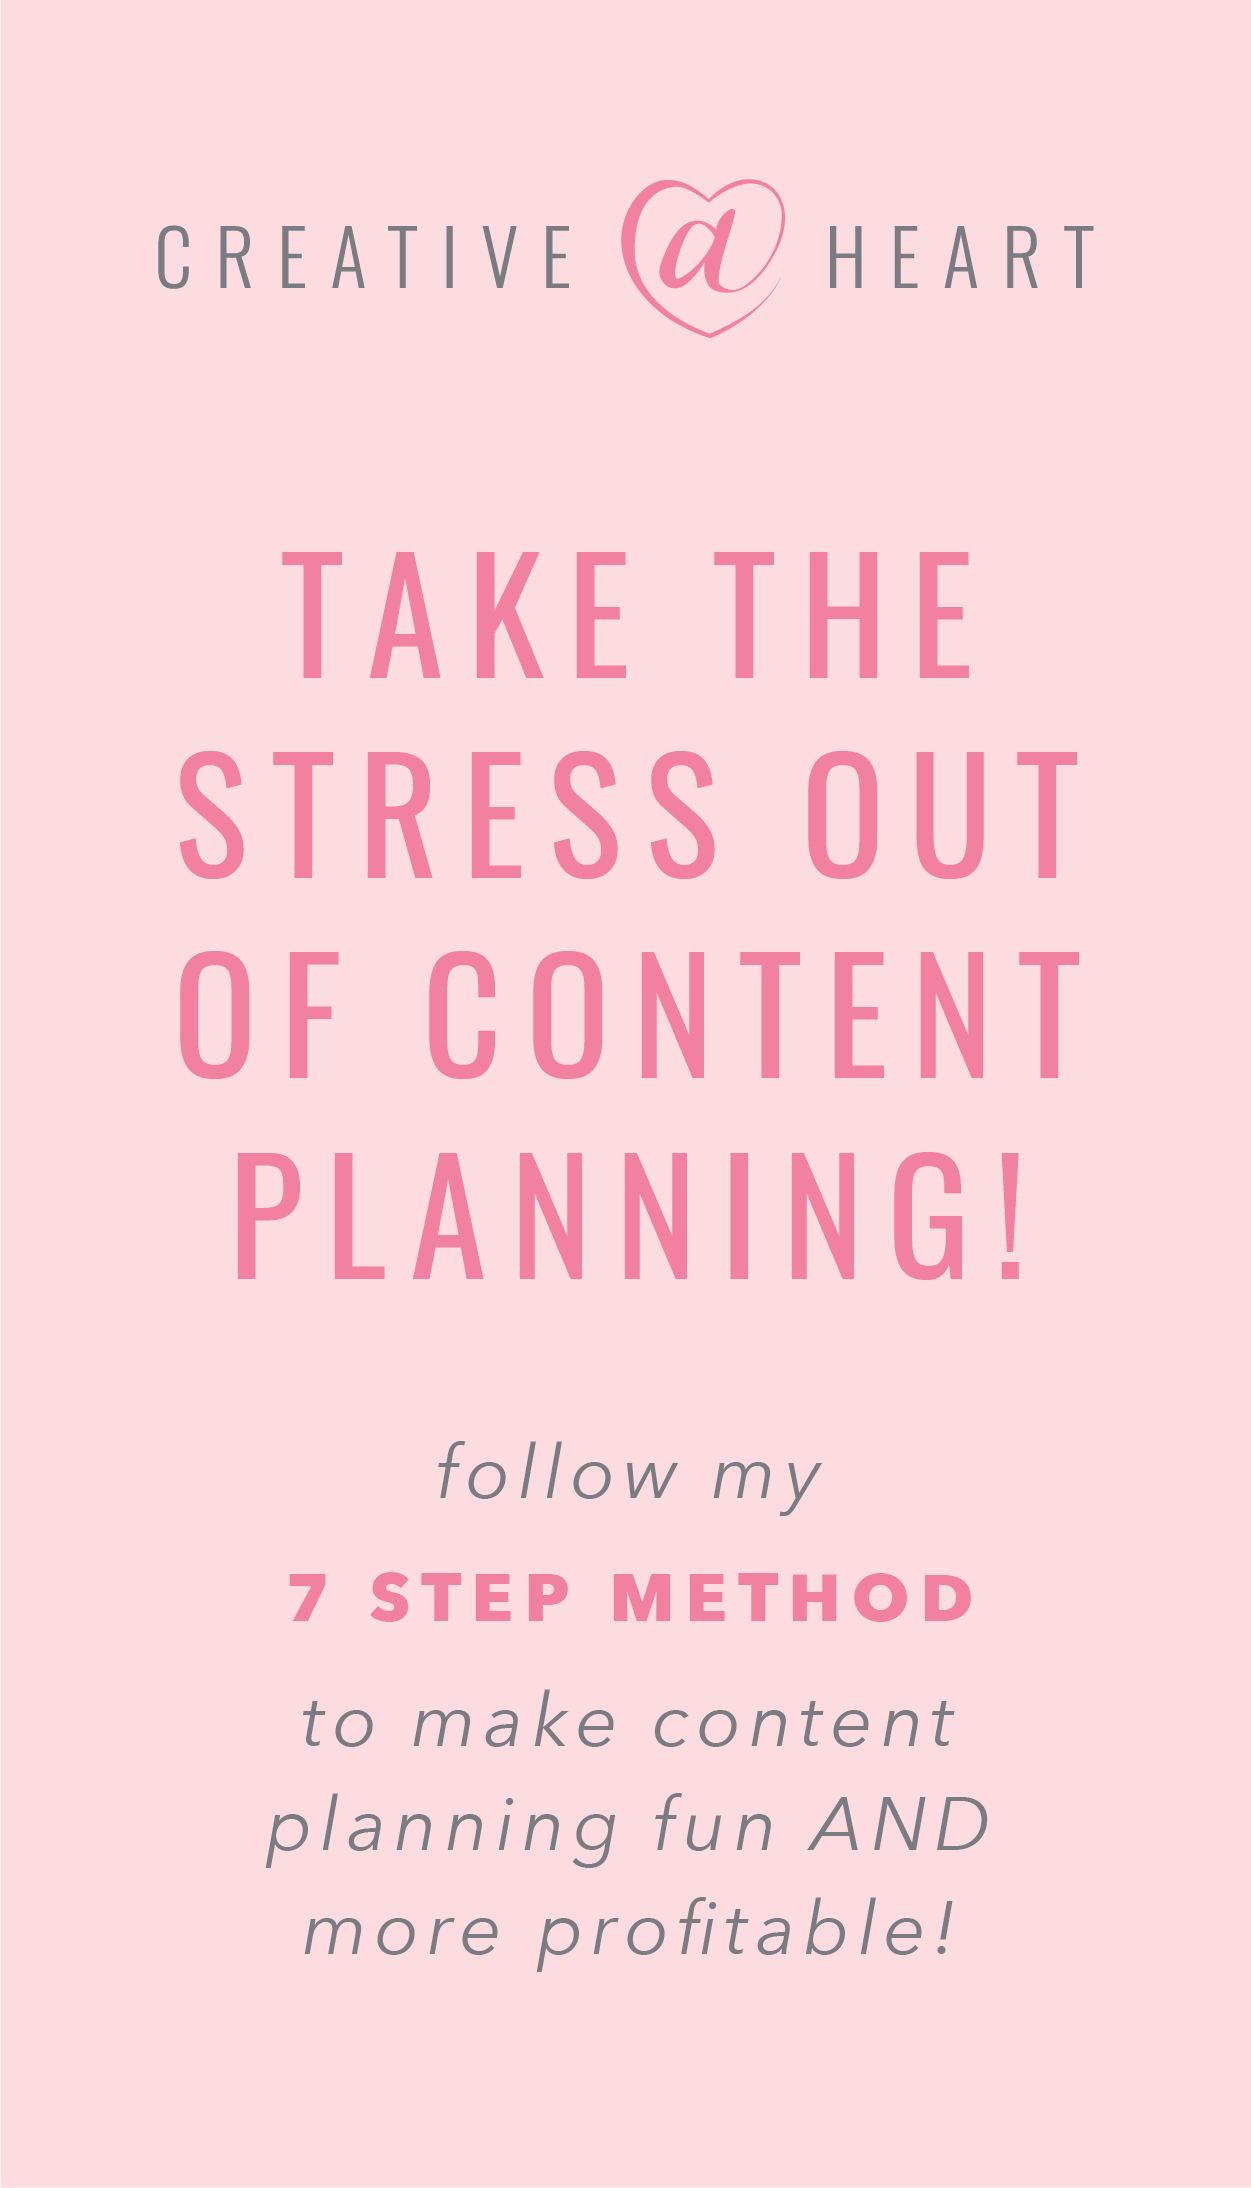 Easy to Implement 7 Steps to Content Planning // Creative at Heart #contentplanning #blogplan #blogging #smallbusiness #easyblogplan